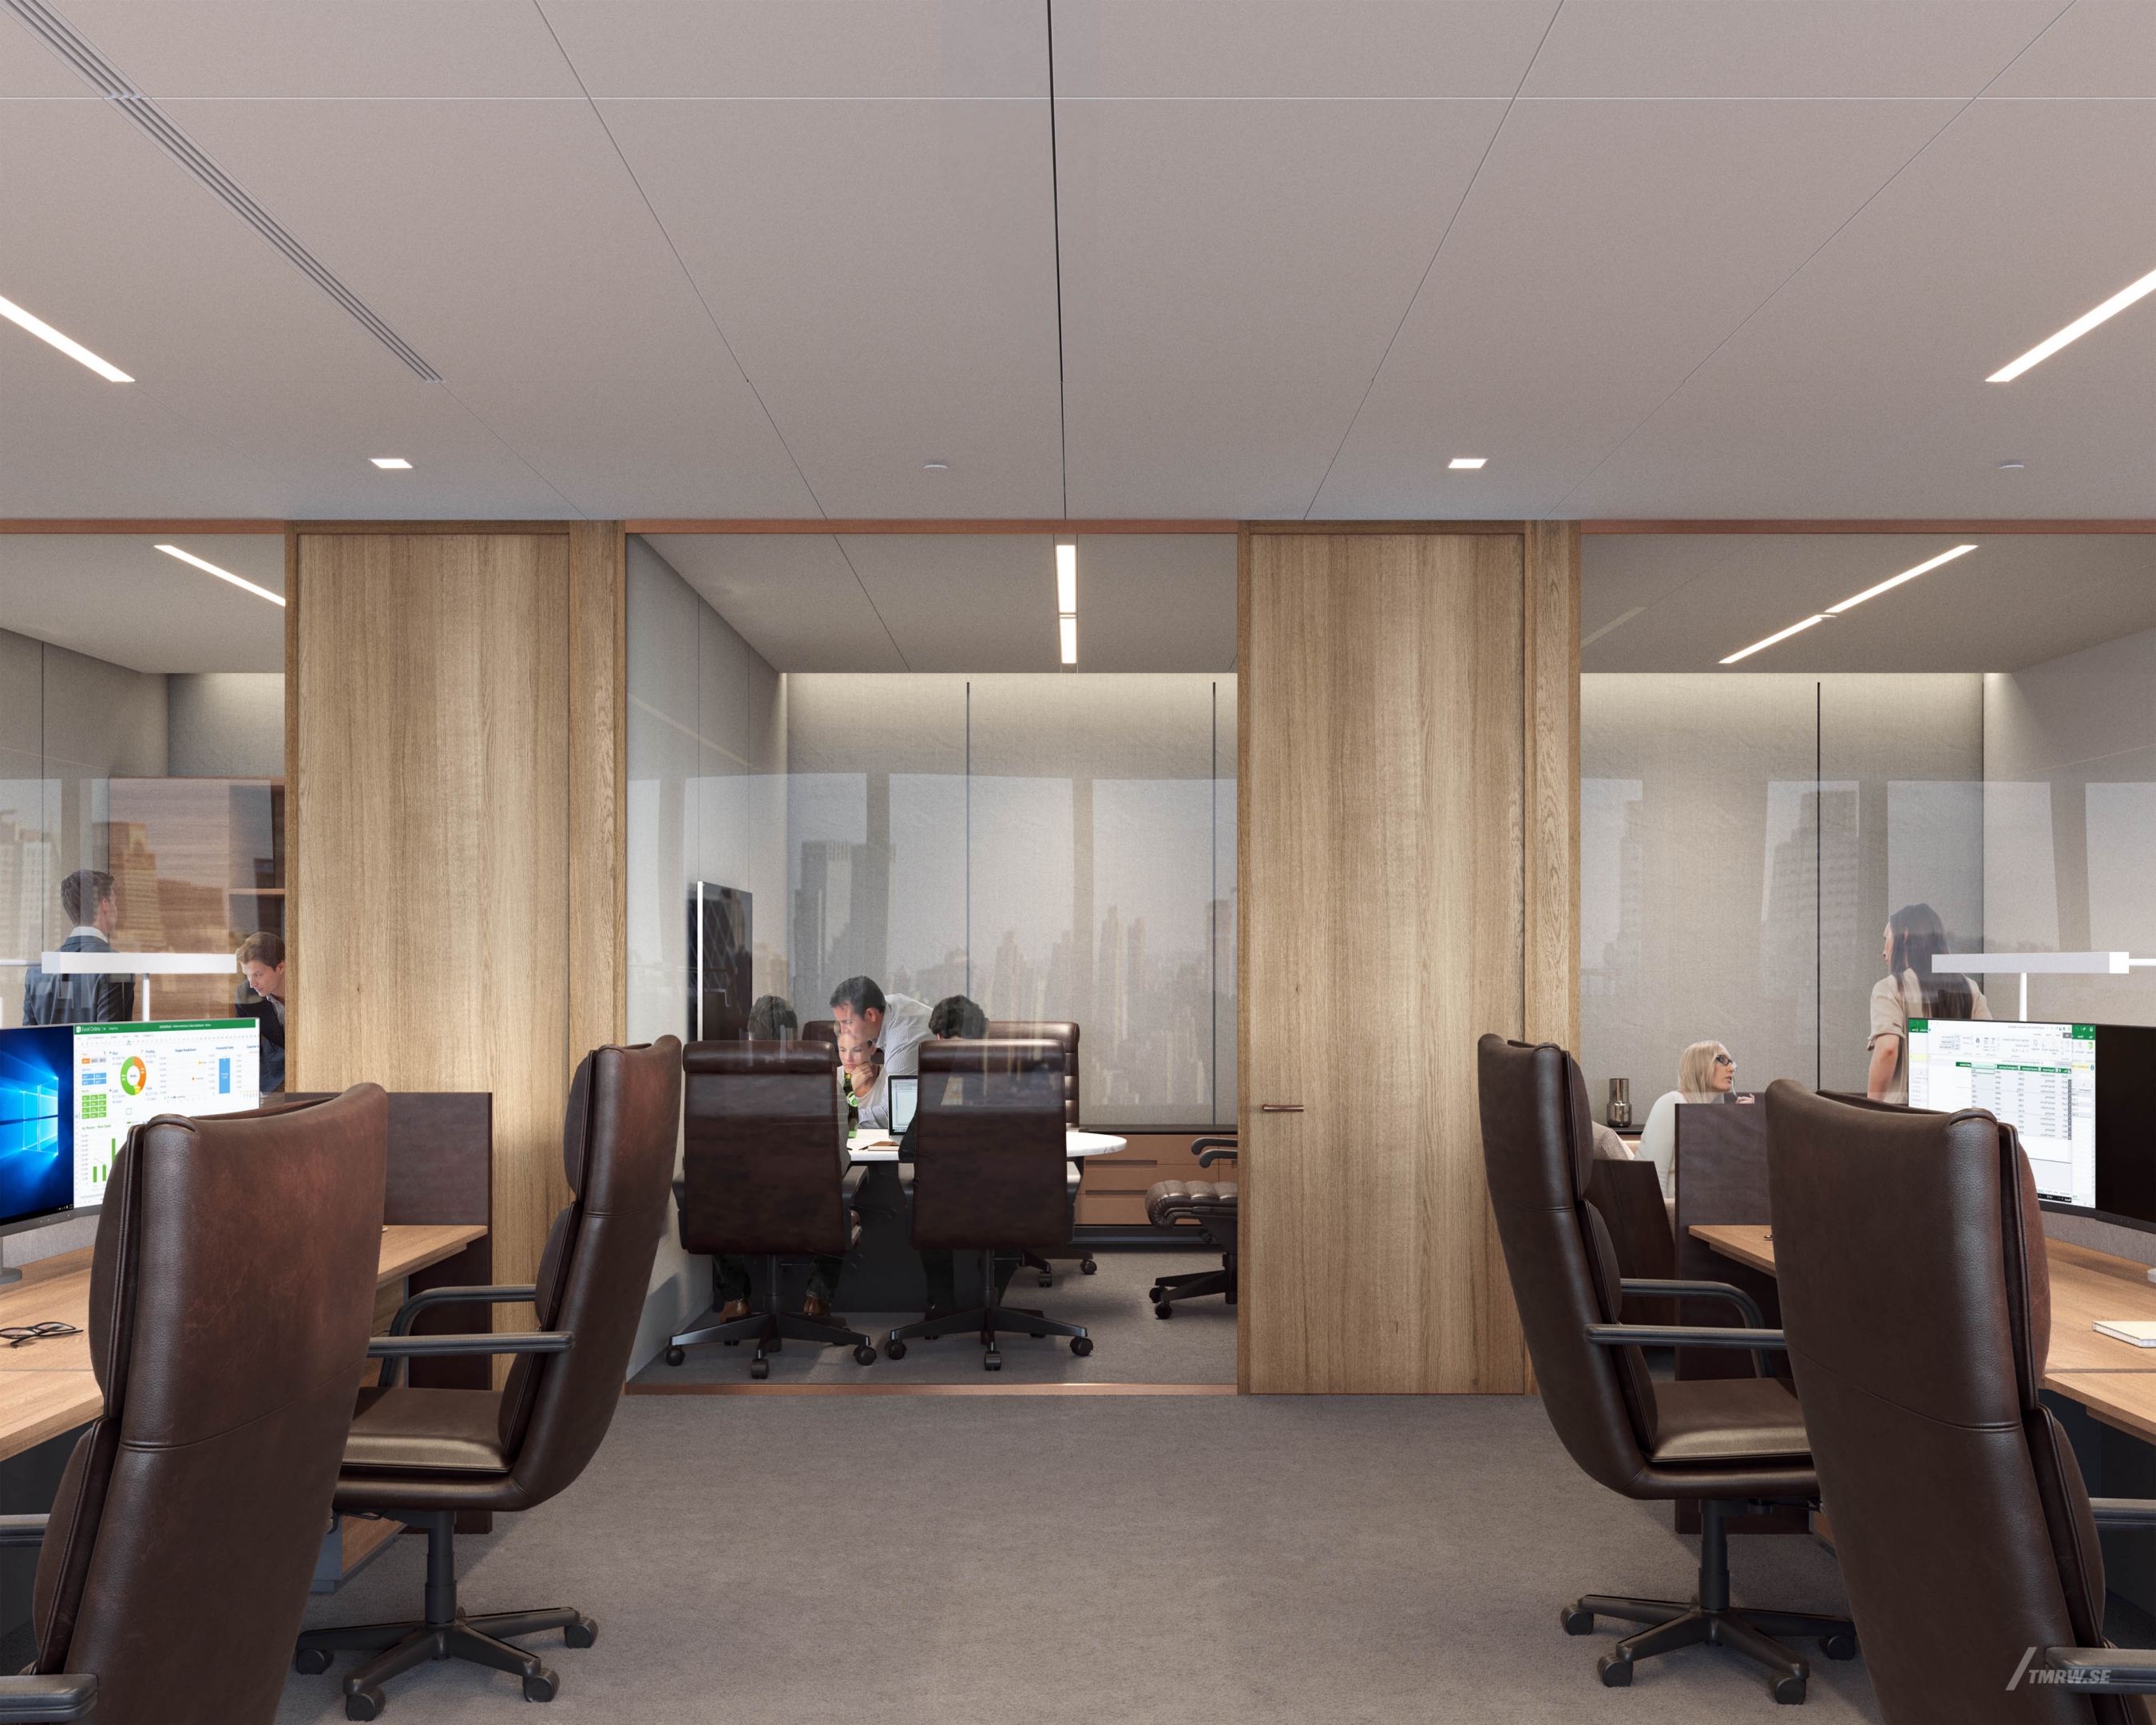 Architectural visualization of KKR for HLW, an office area daylight from an interior view.